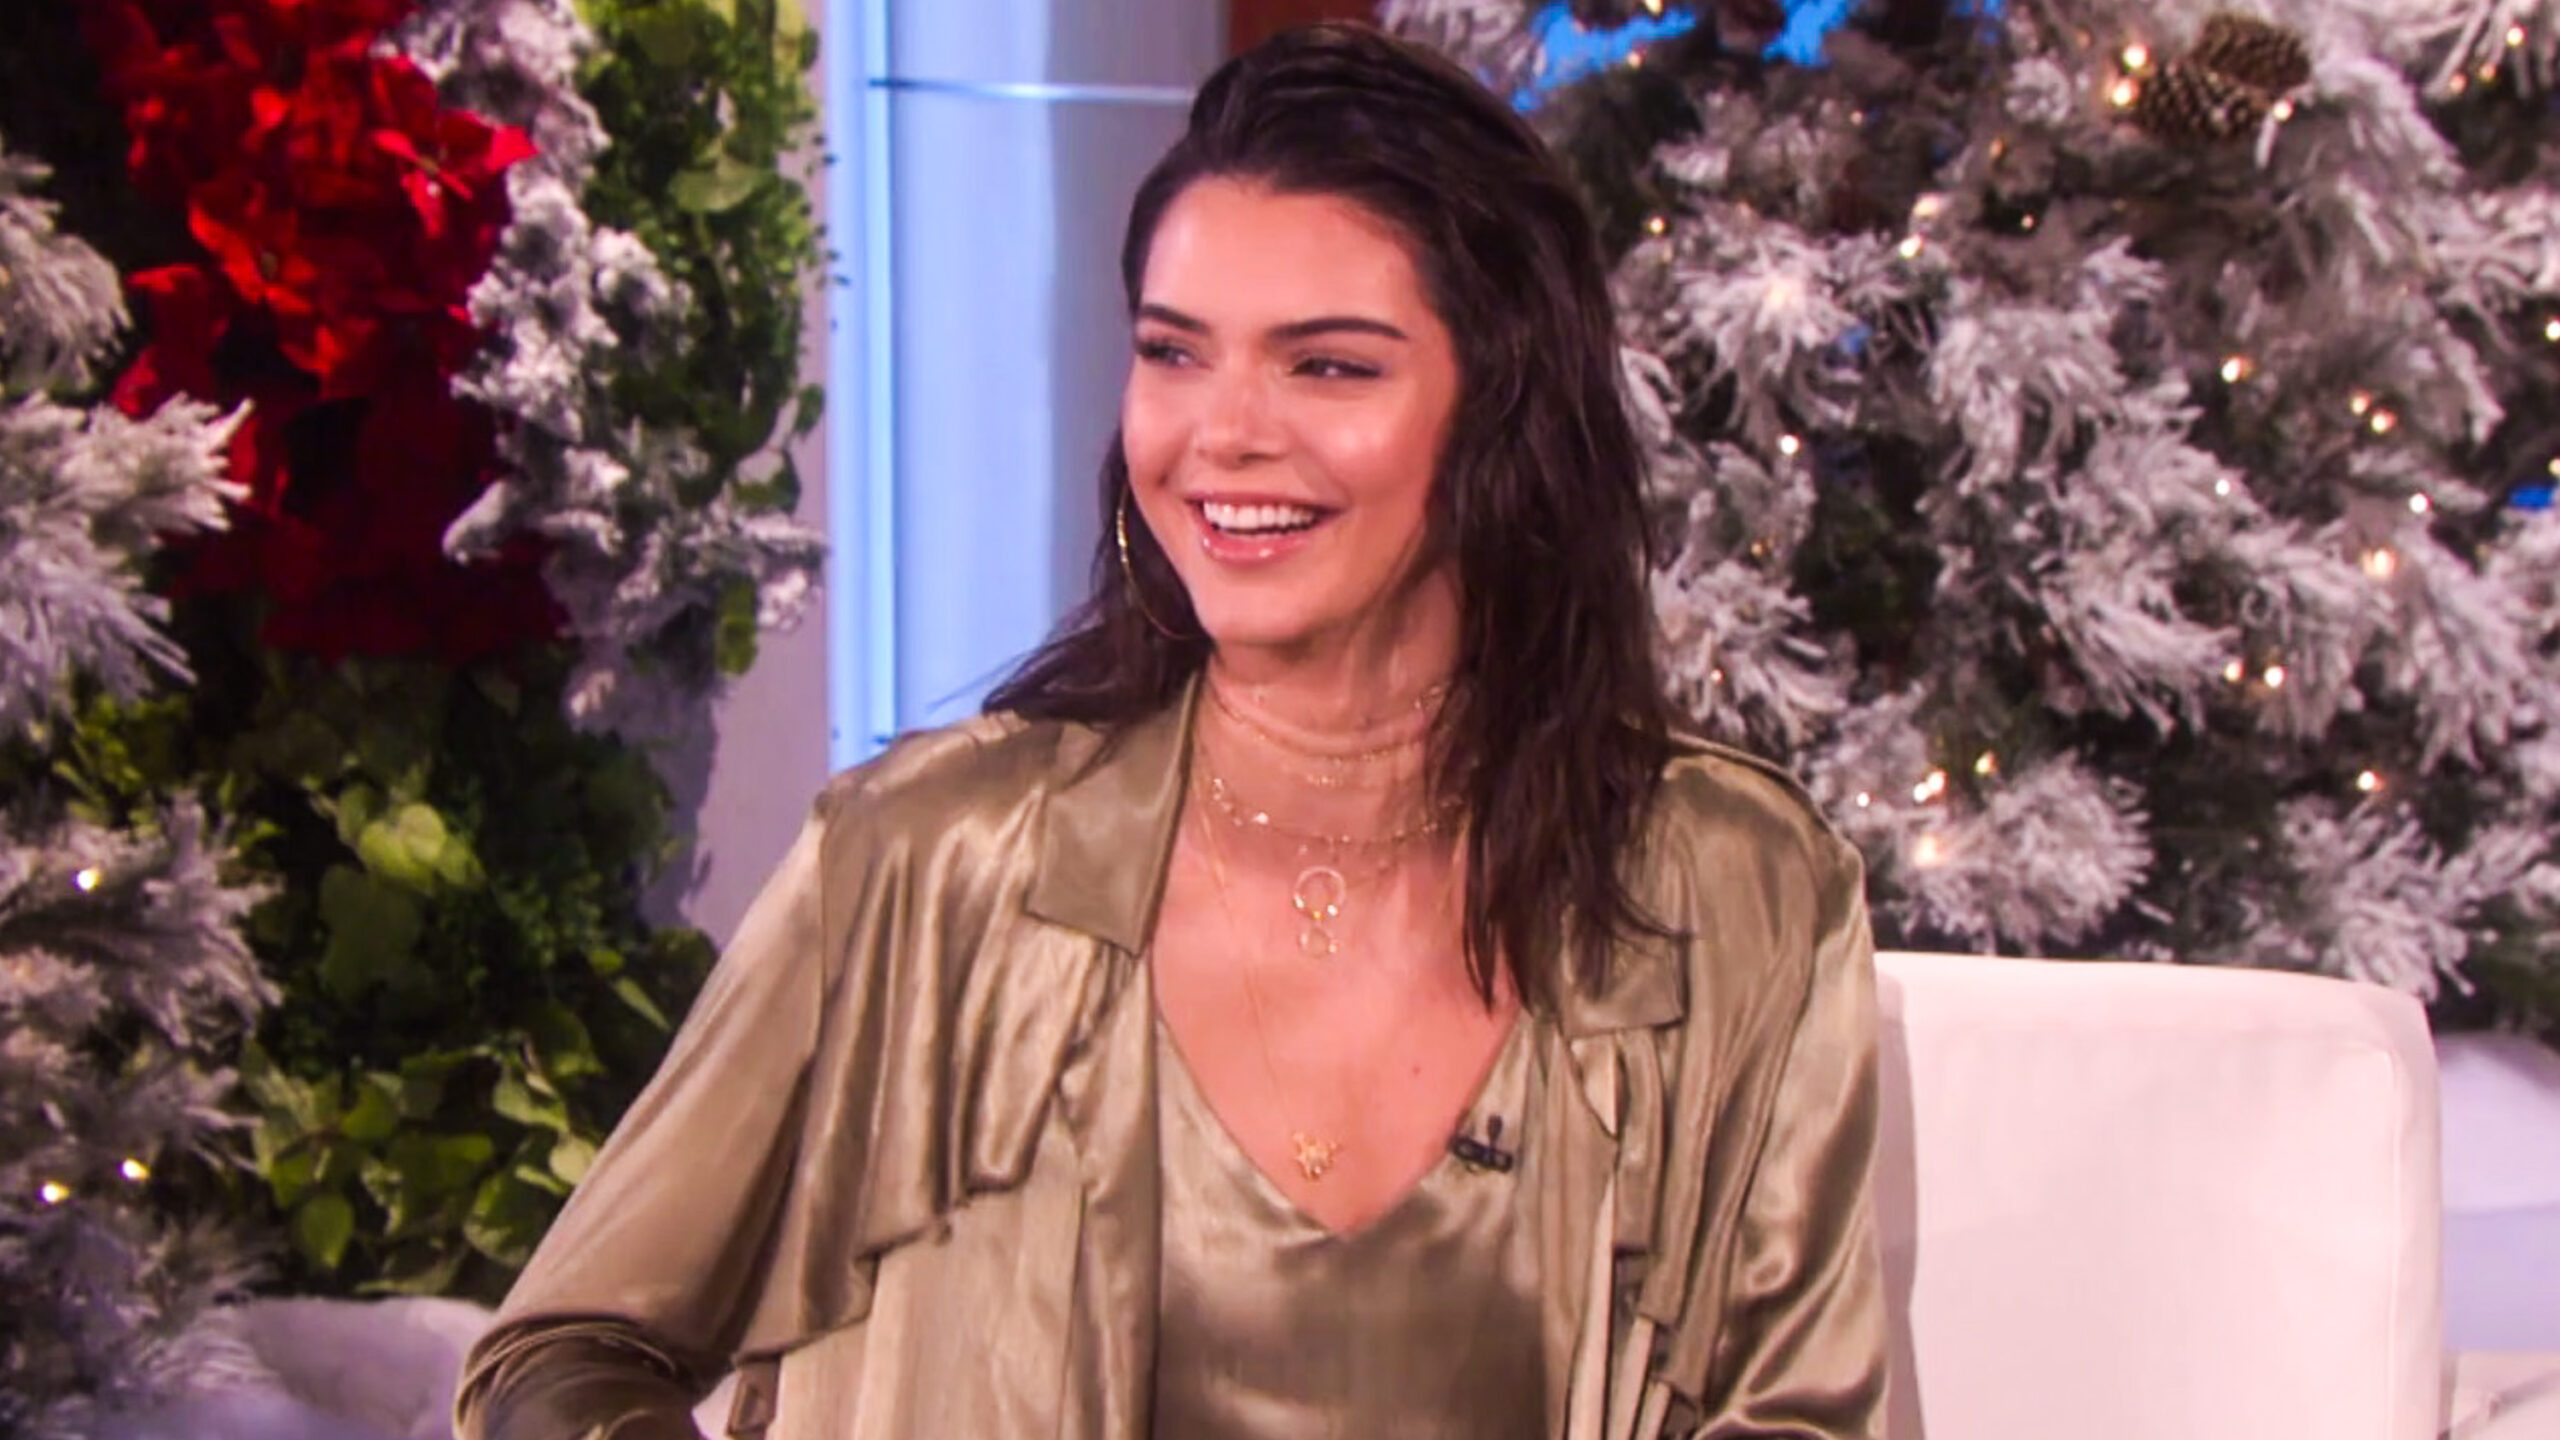 WATCH: Kendall Jenner explains why she quit Instagram